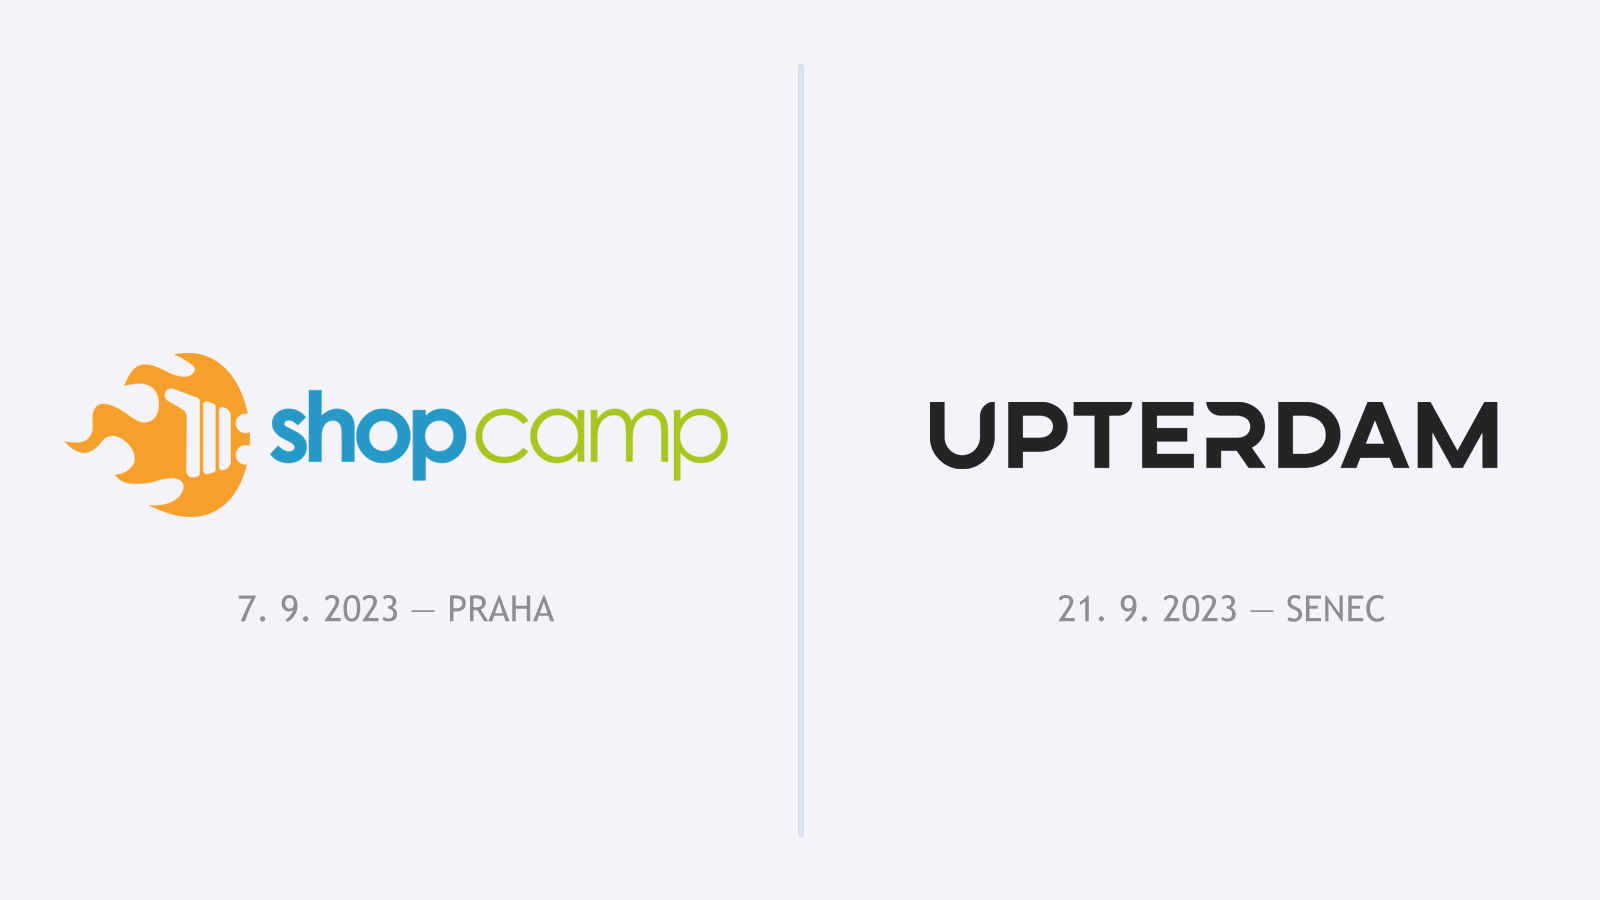 You will meet Retino at the Shopcamp and Upterdam conferences in September